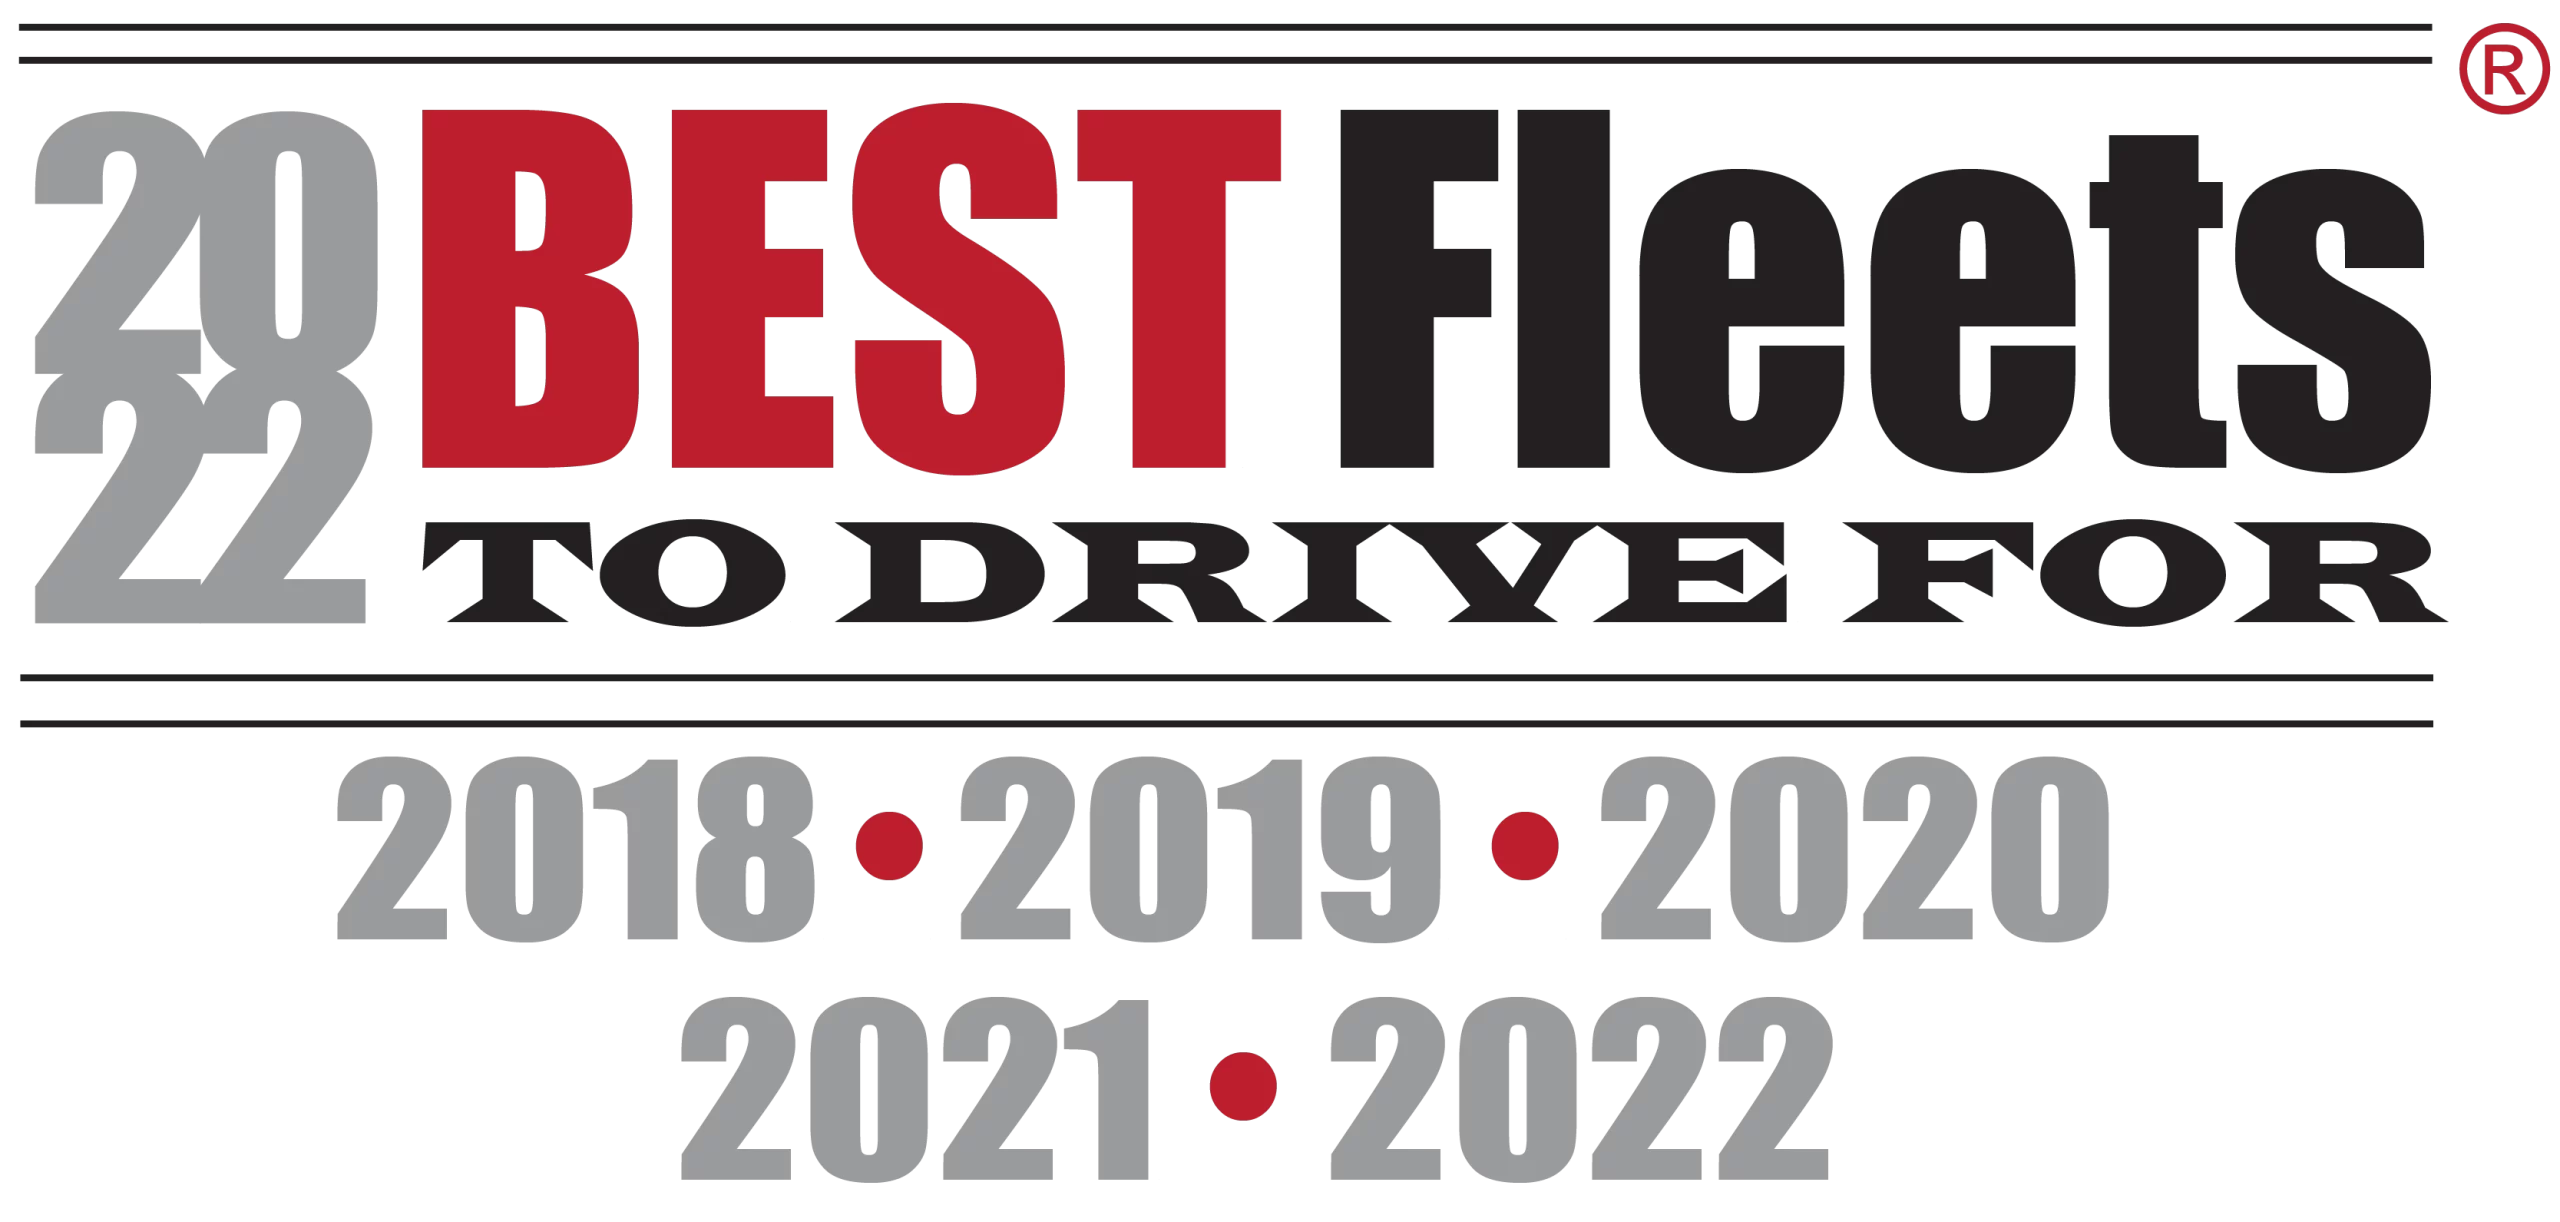 2022 best fleets to drive for banner